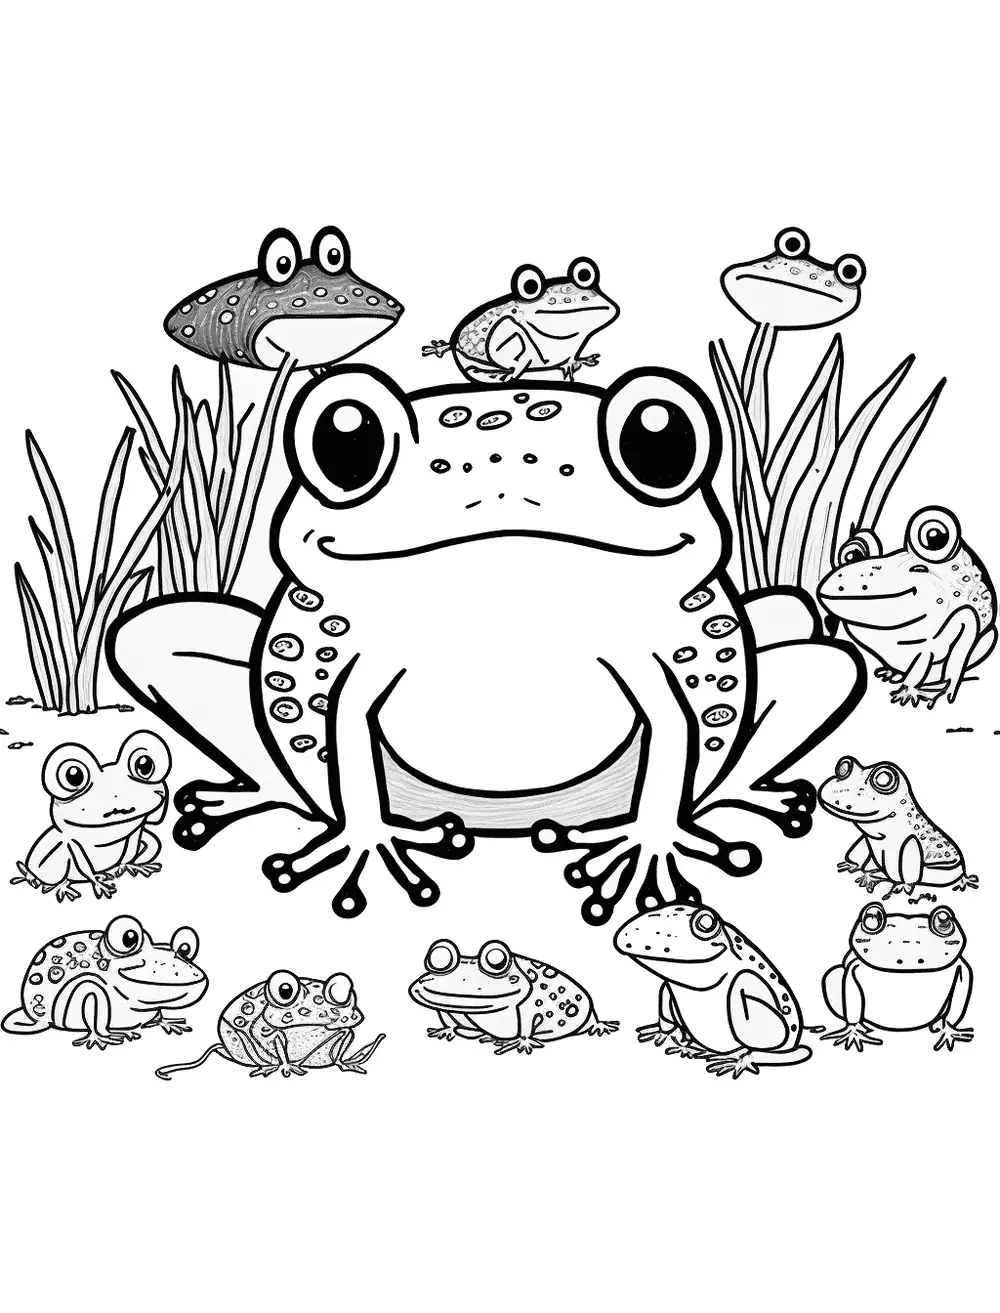 Frog And Friends Coloring Page - A group of weird looking frogs